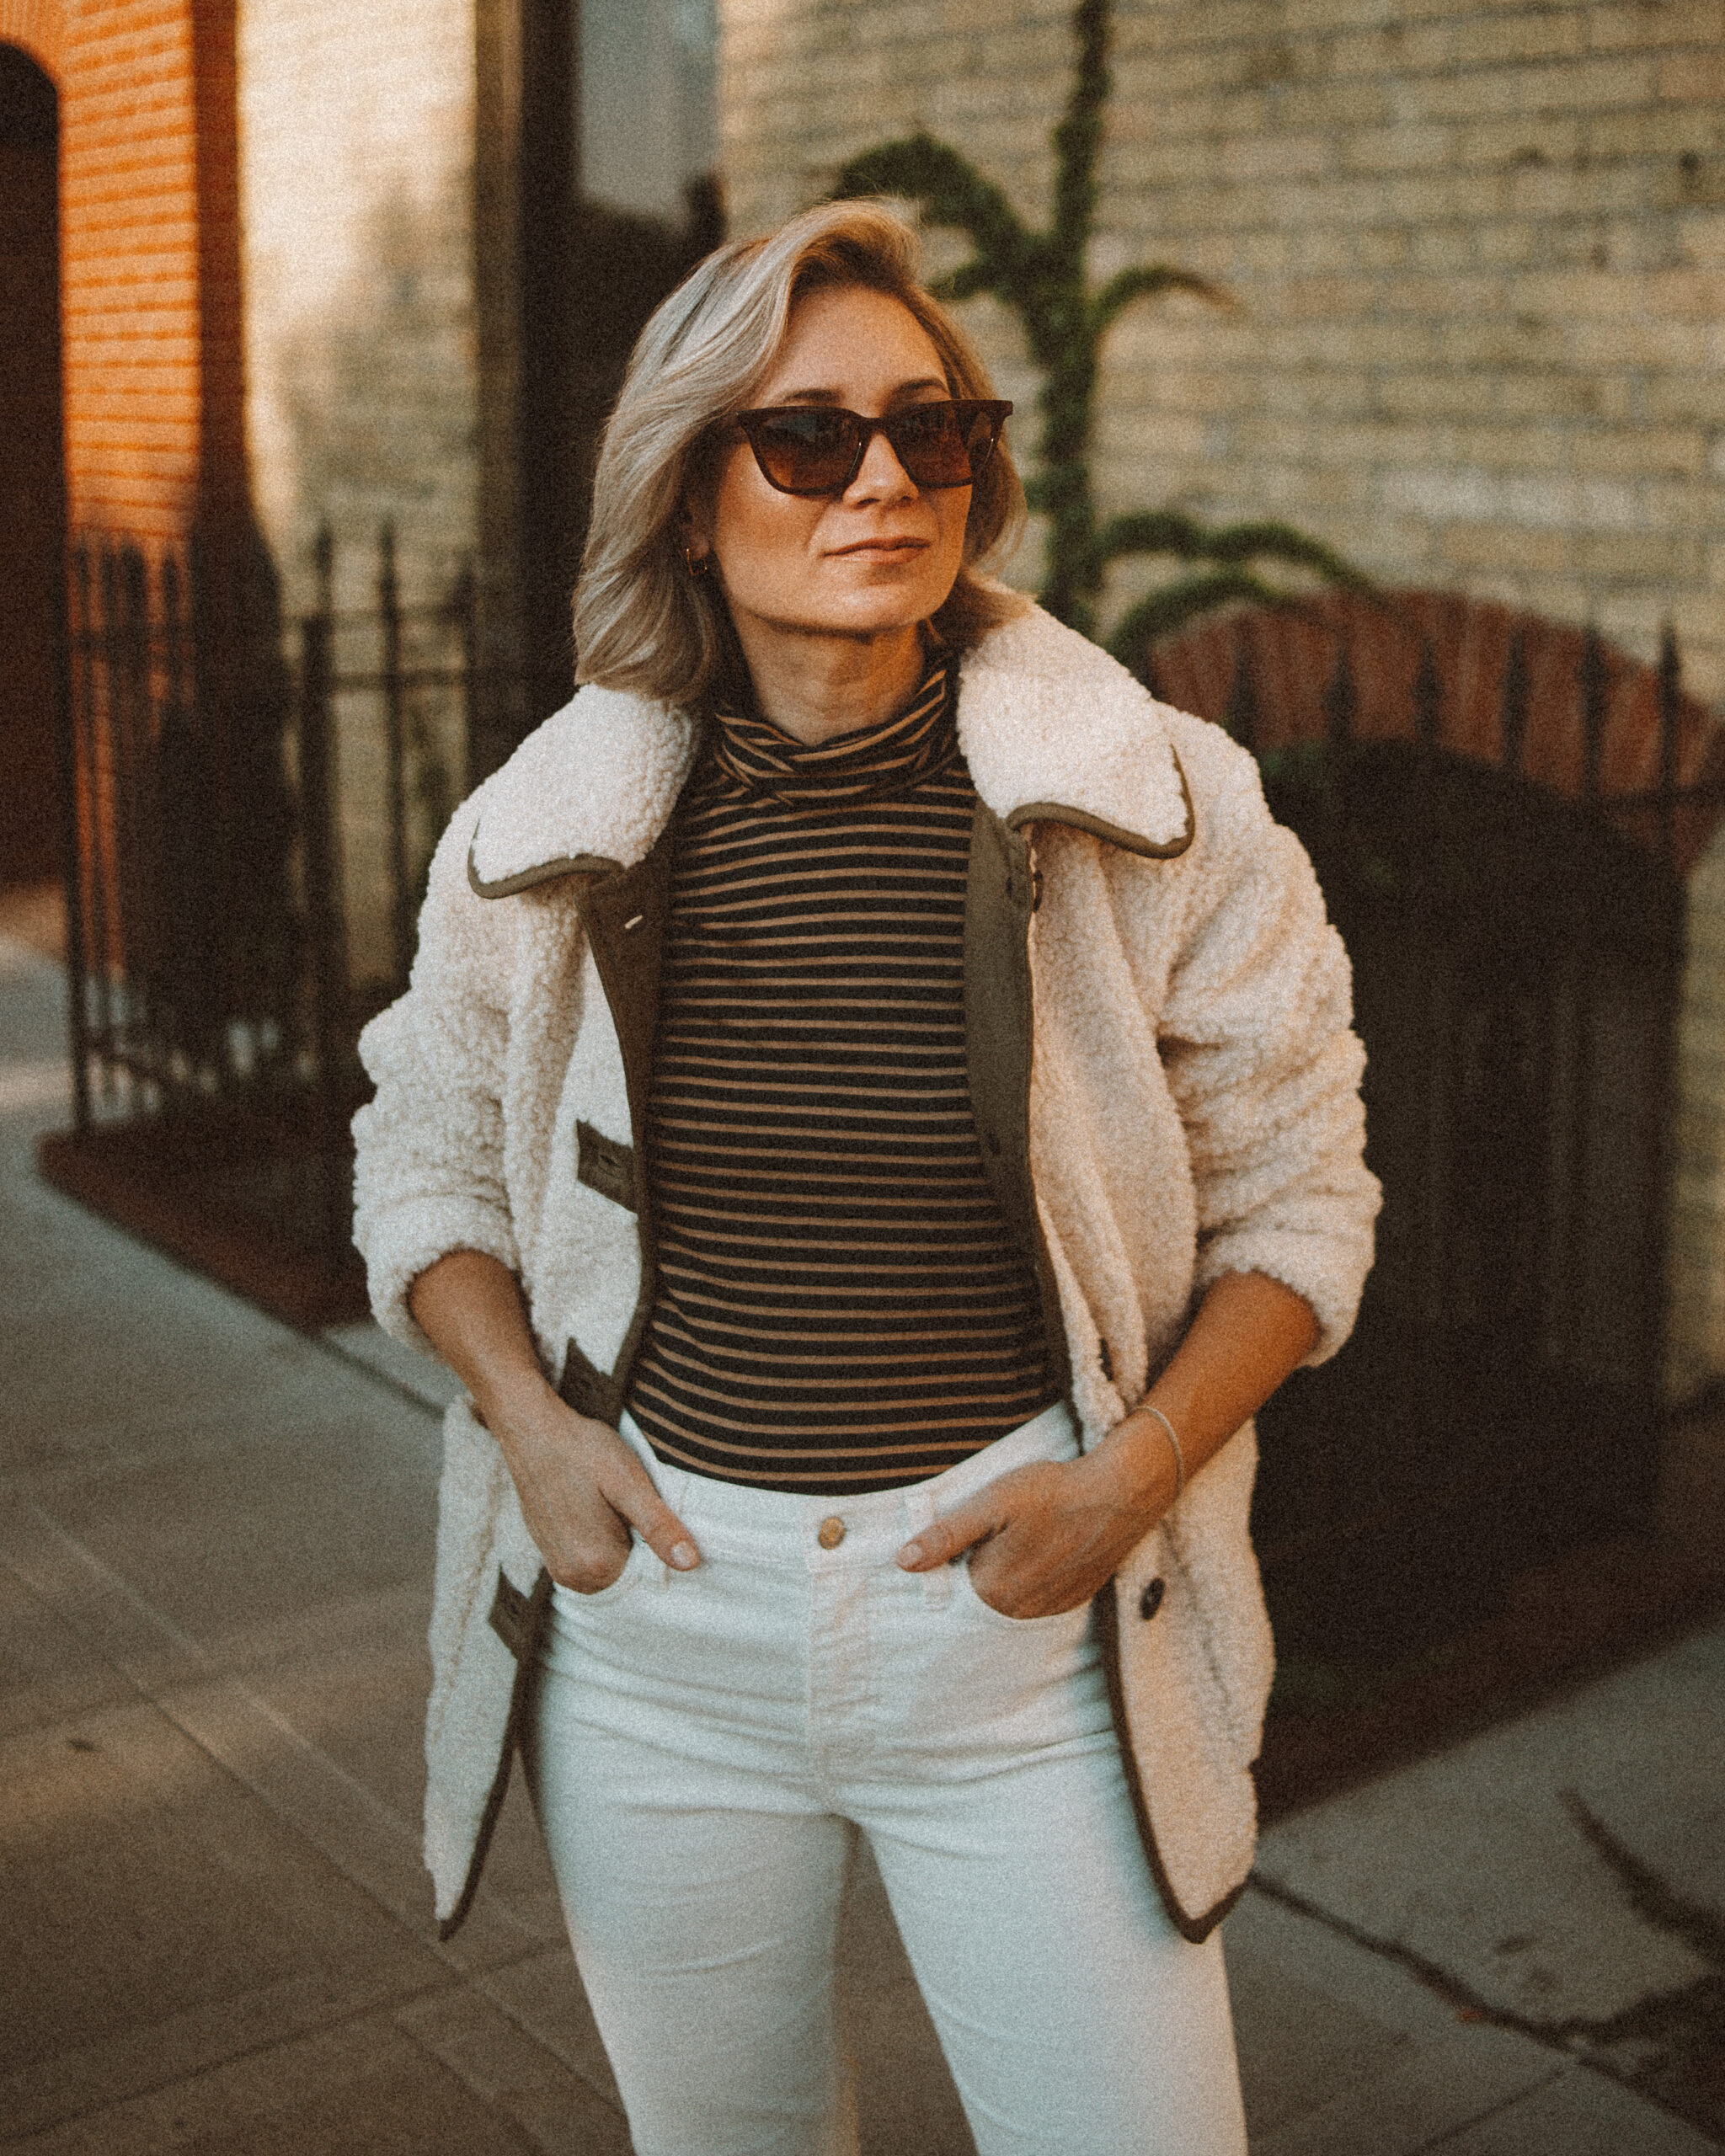 Karin Emily wears the perfect pair of corduroy pants with a striped turtleneck, and sherpa jacket